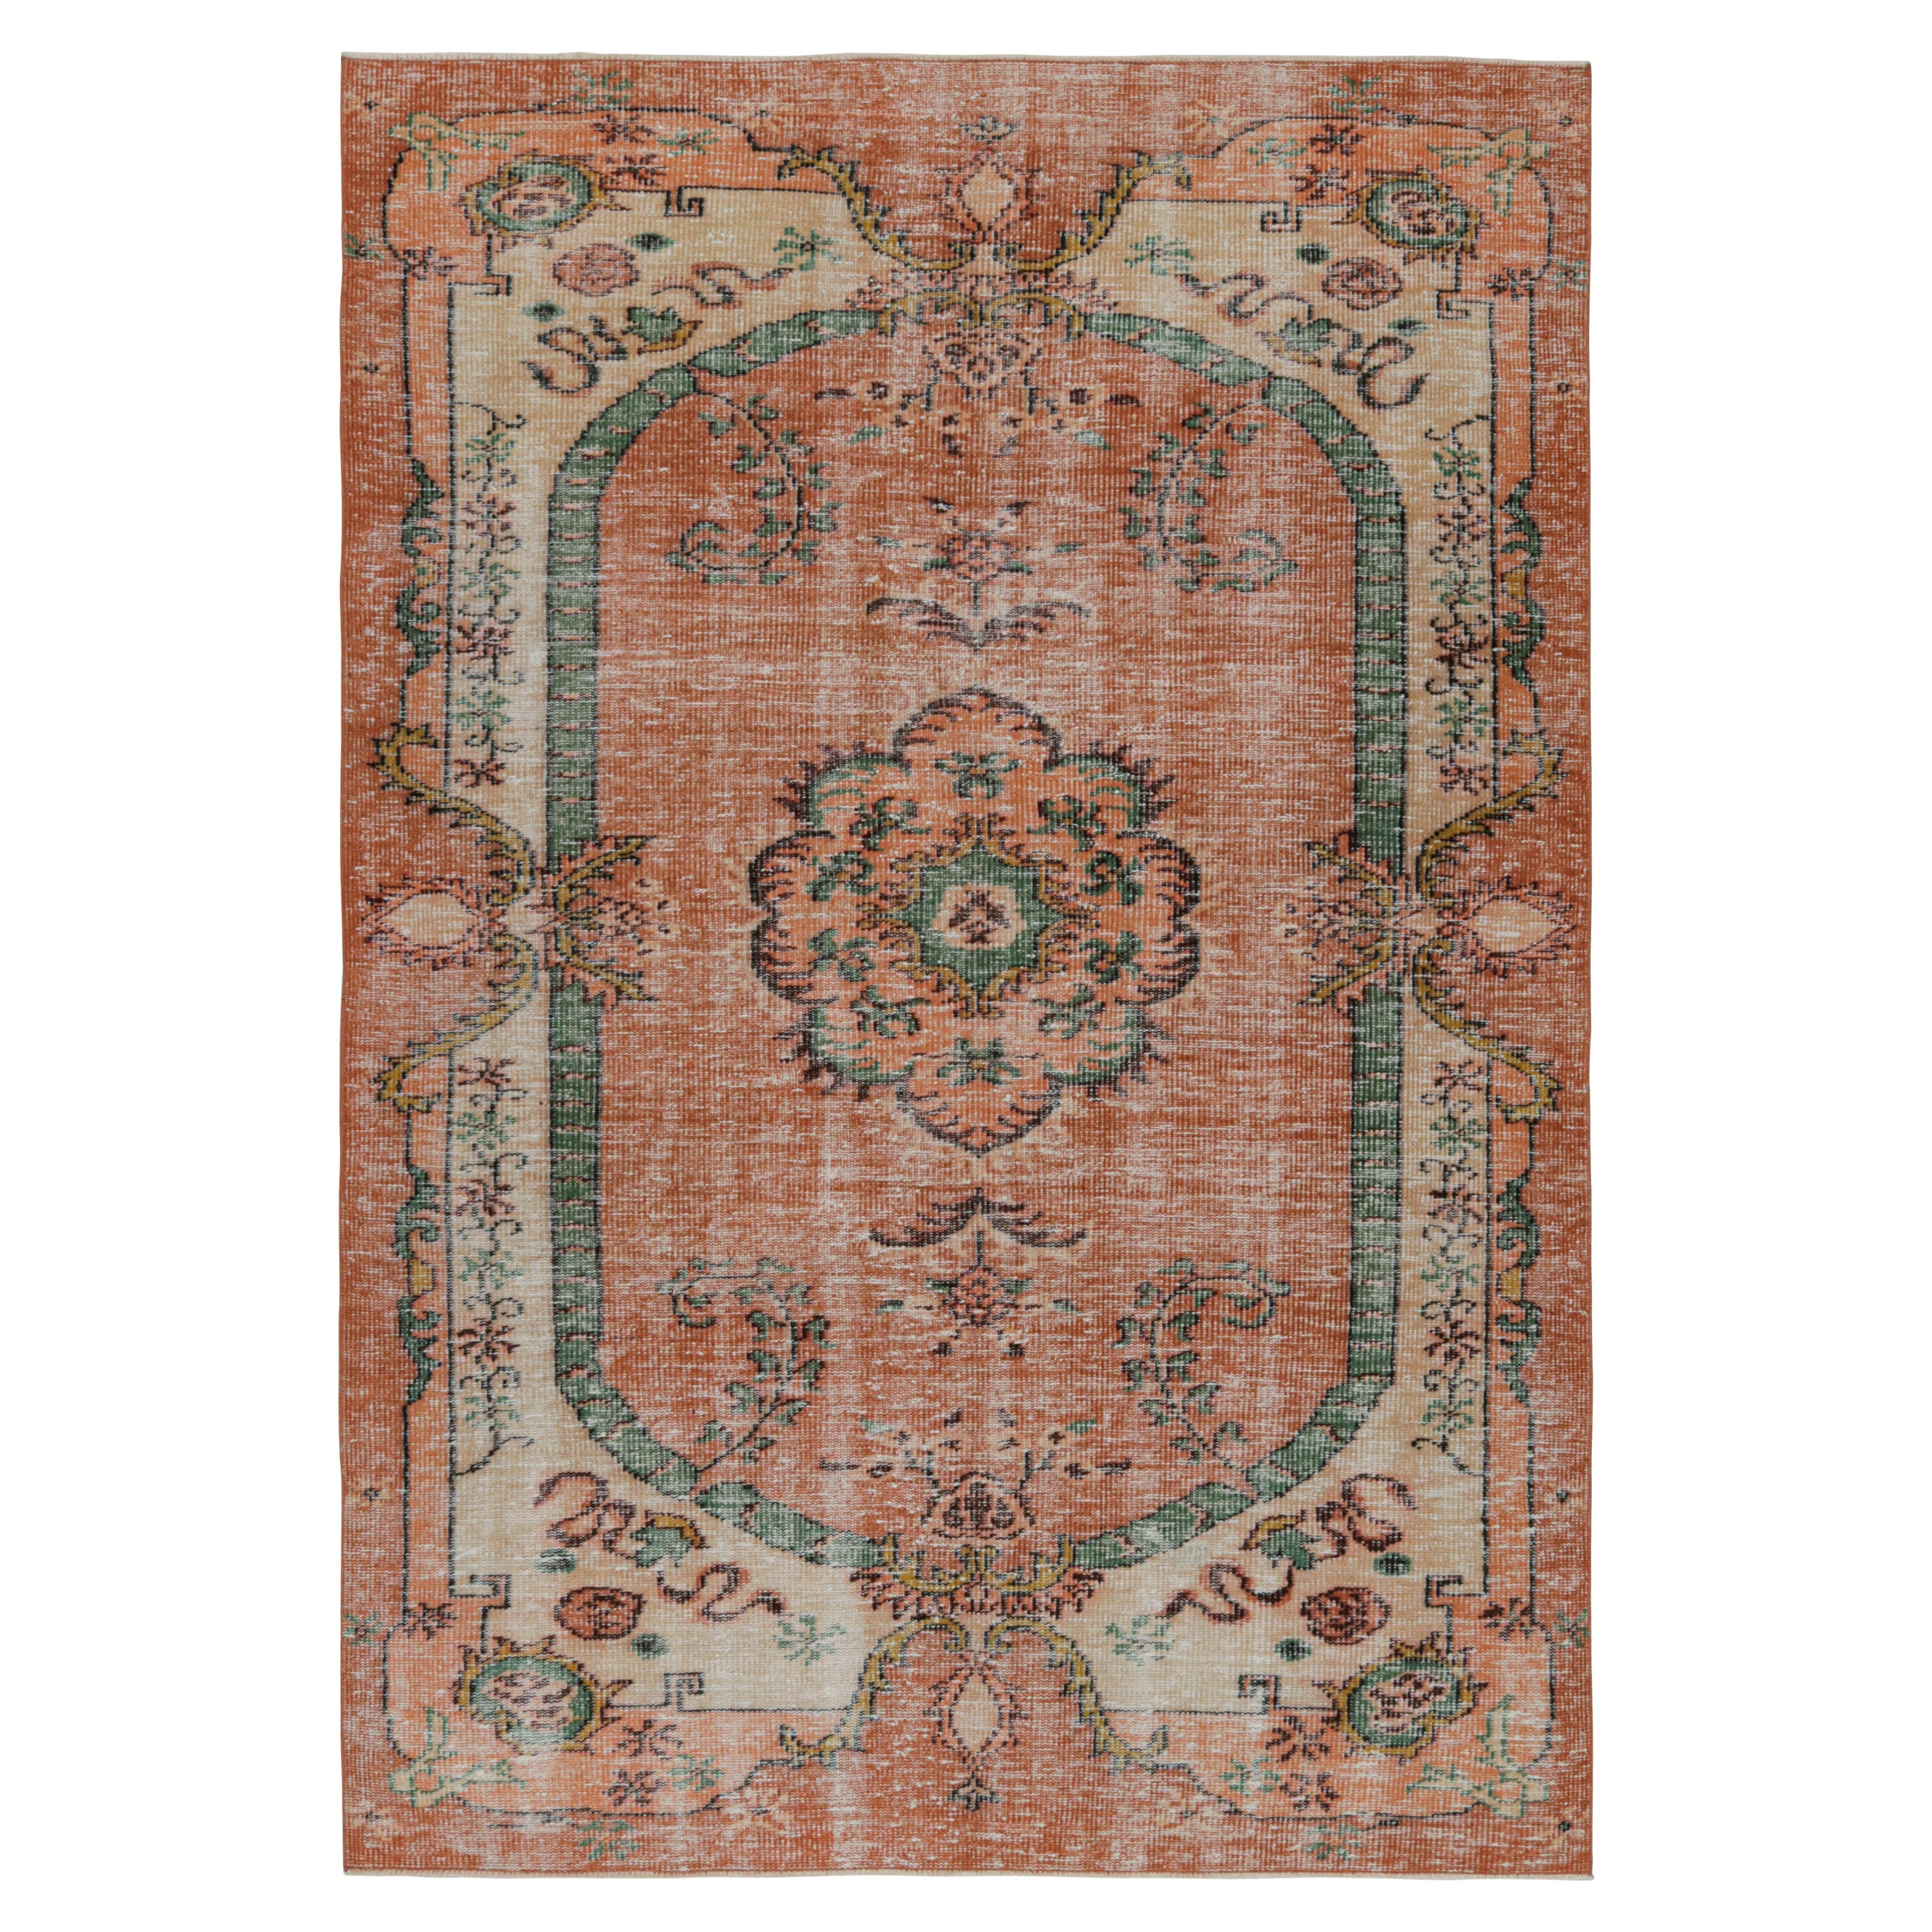 Vintage European Style Rug, with Geometric Floral Patterns, from Rug & Kilim